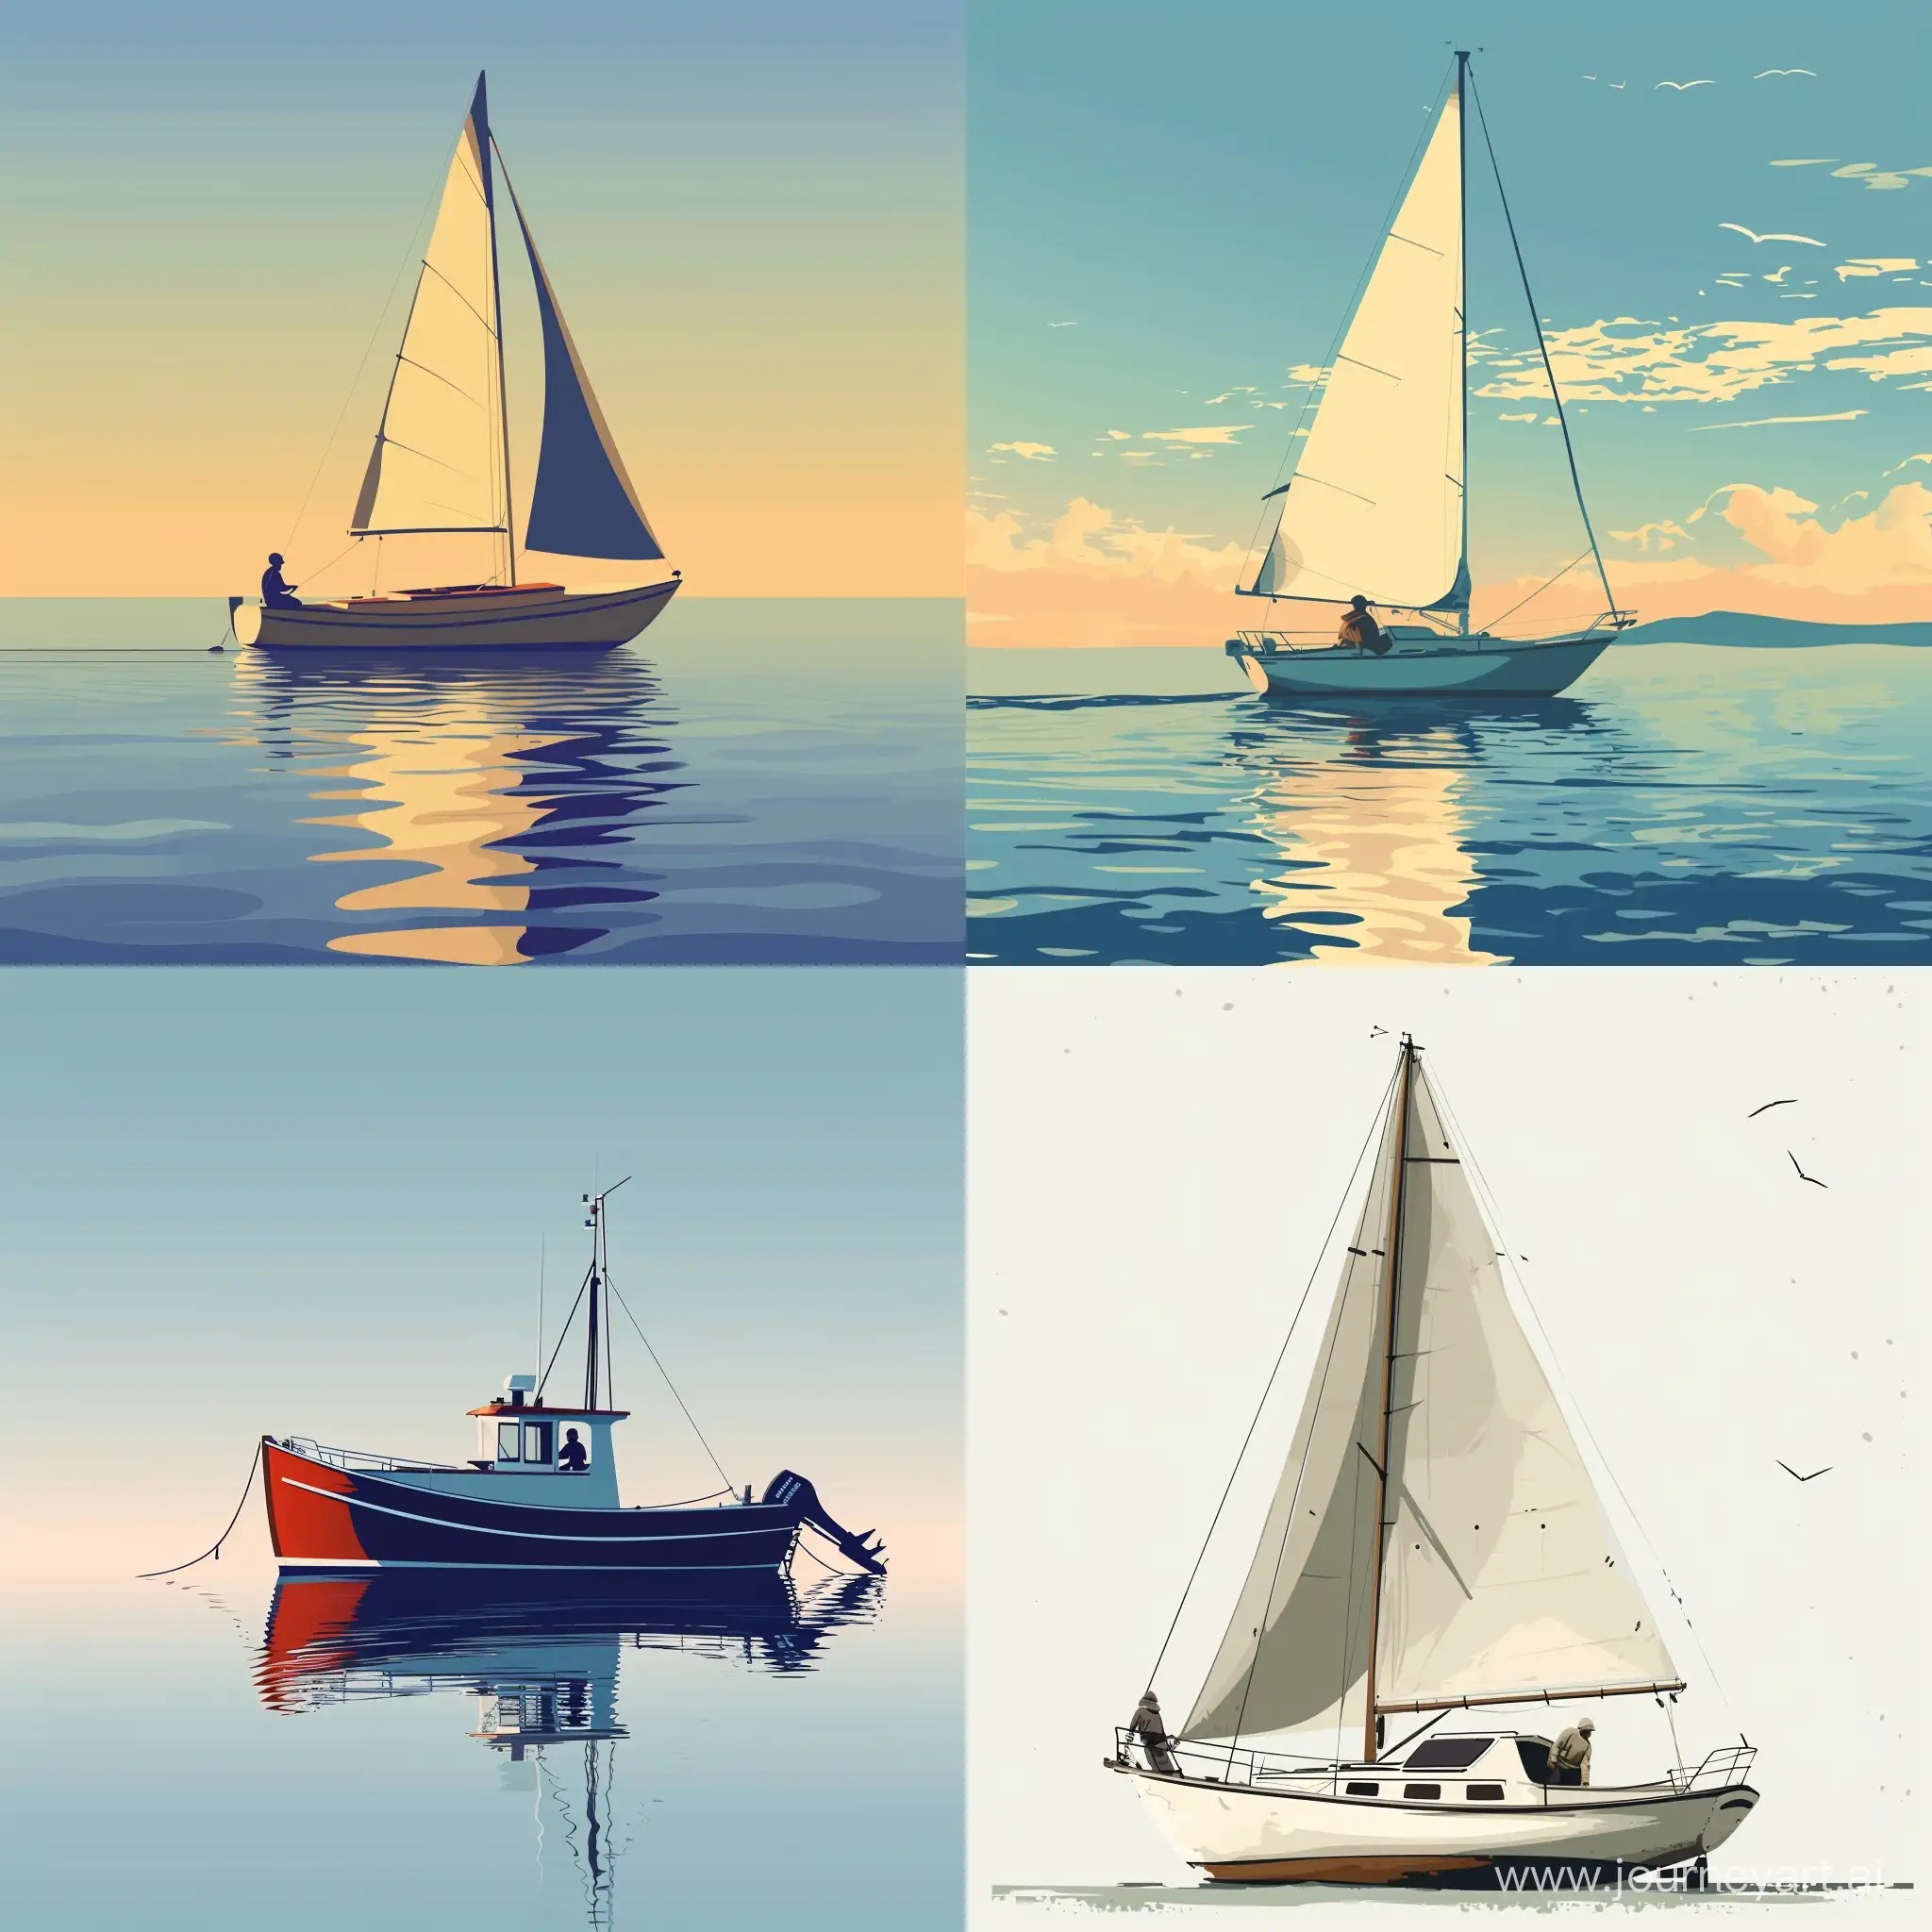 Solitary-Sailor-in-HighQuality-Vector-Style-Boat-Illustration